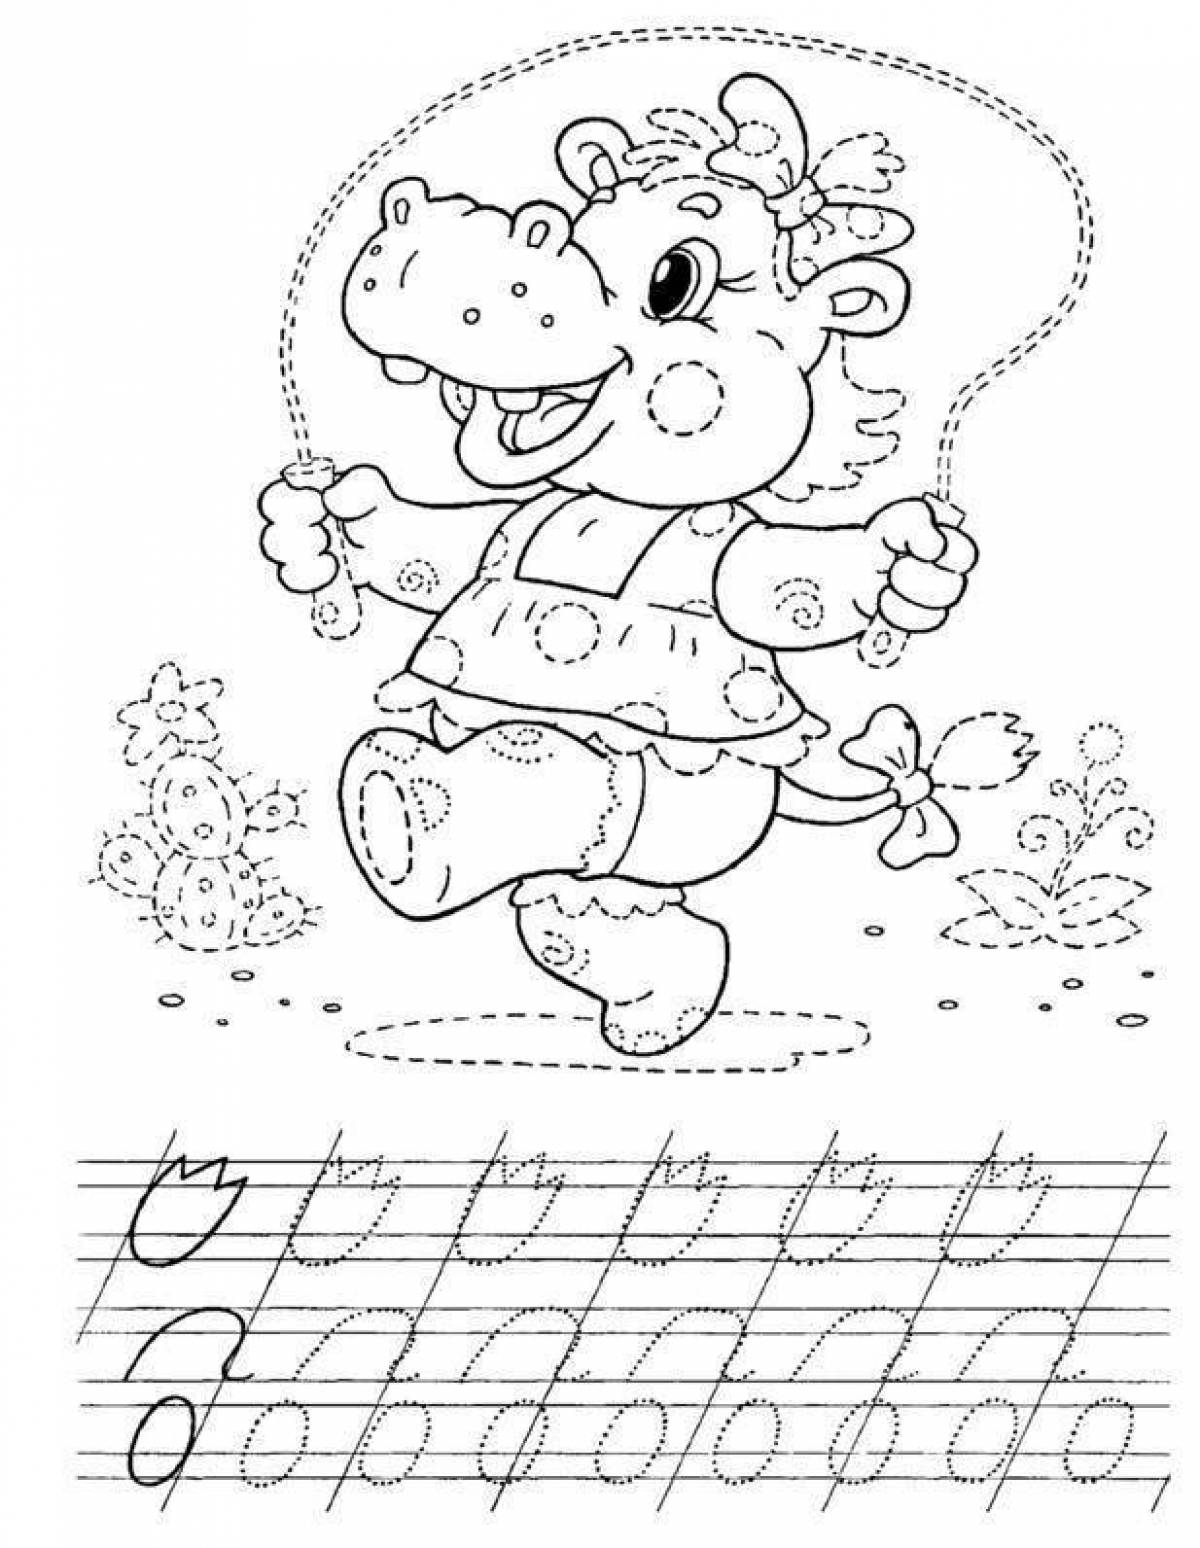 Vibrant recipe coloring page for kids